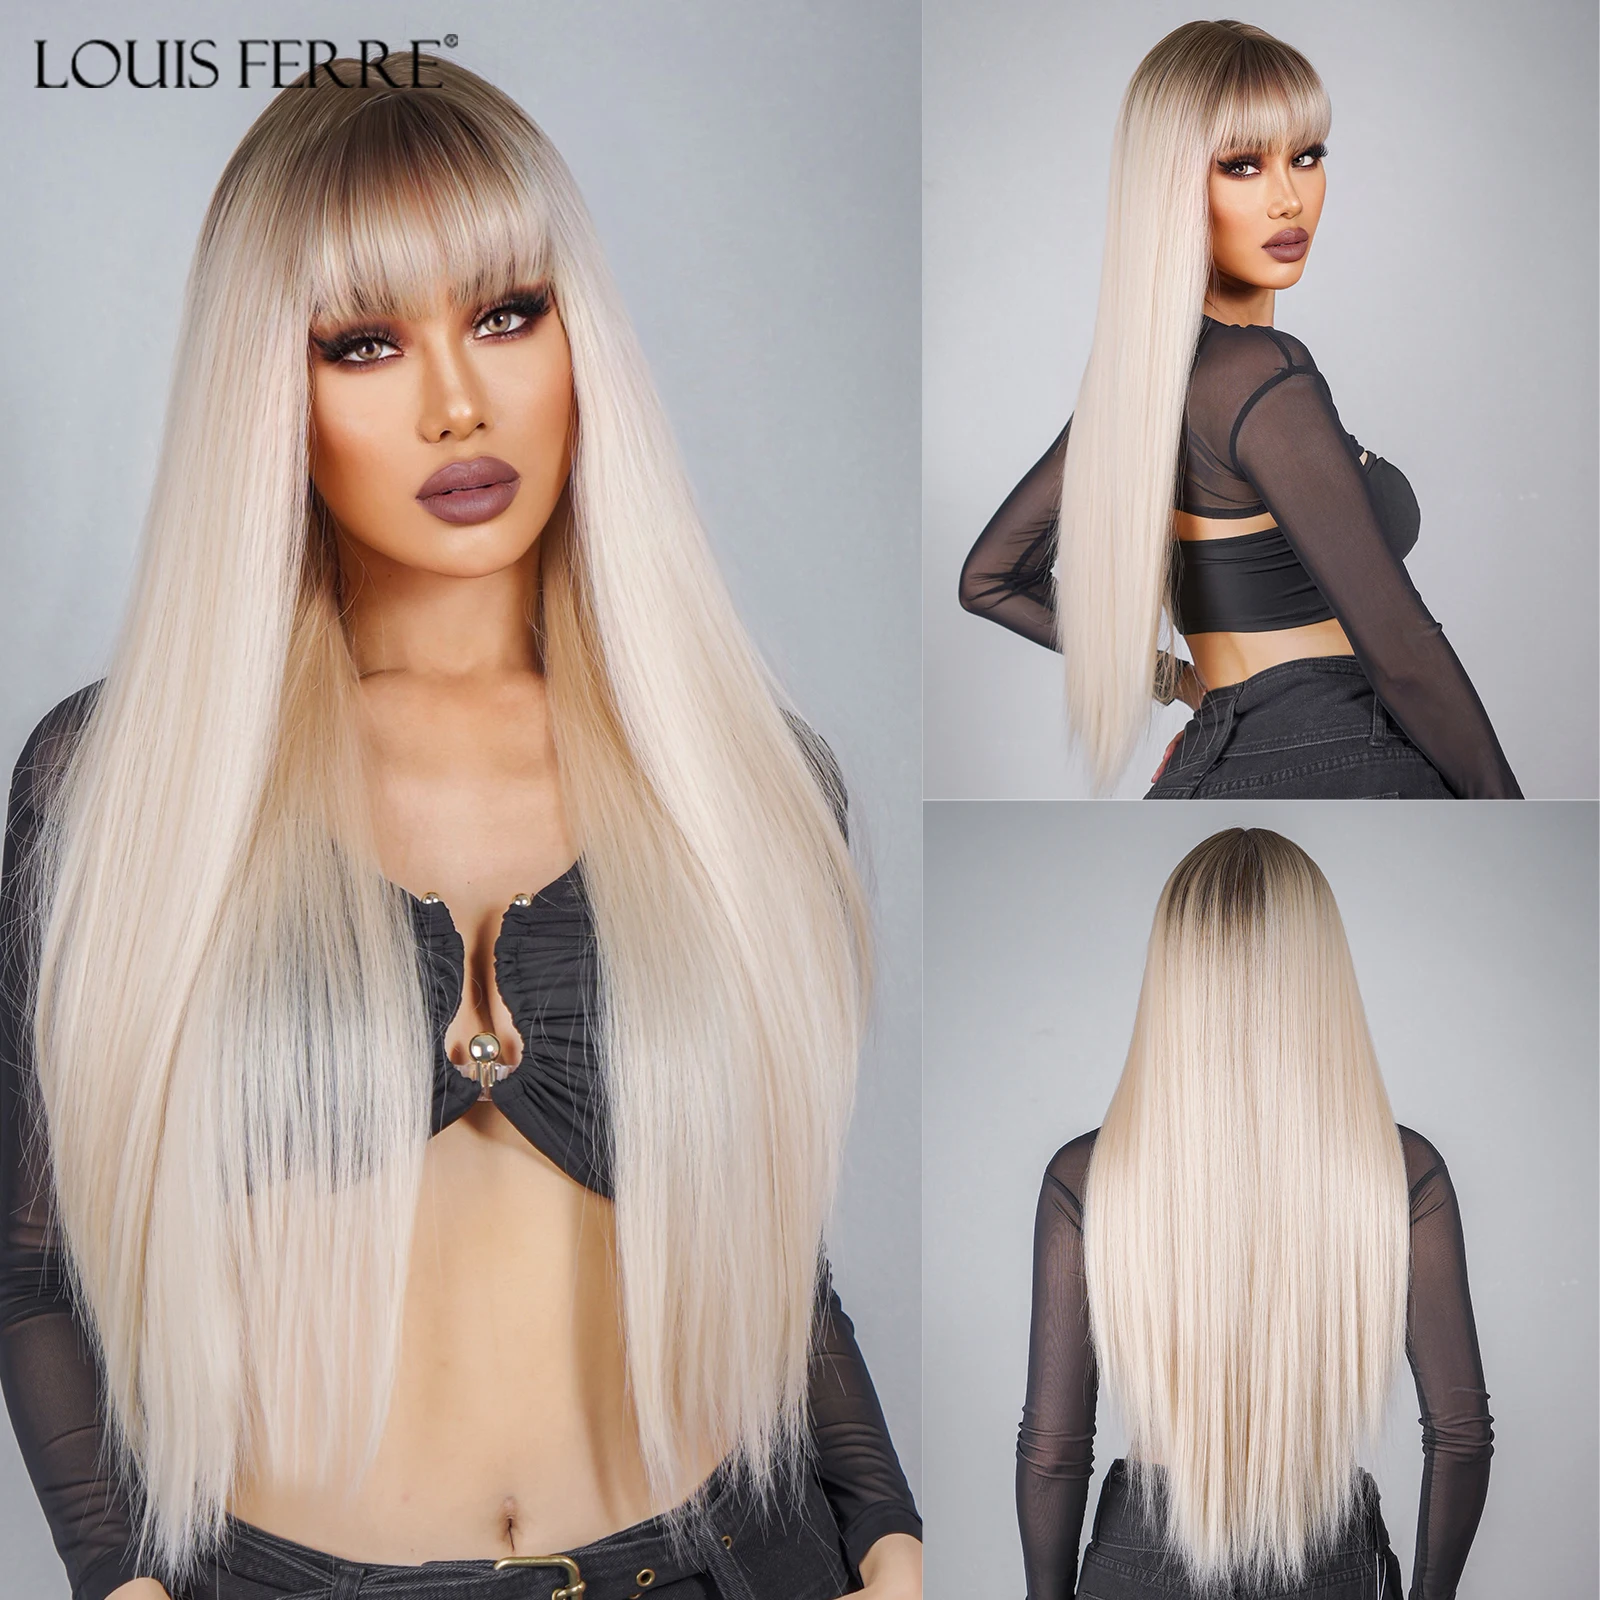 

LOUIS FERRE Light Blonde Synthetic Hair Long Straight Brown Platinum Ombre Wig for Women Daily Cosplay Natural Hair With Bangs